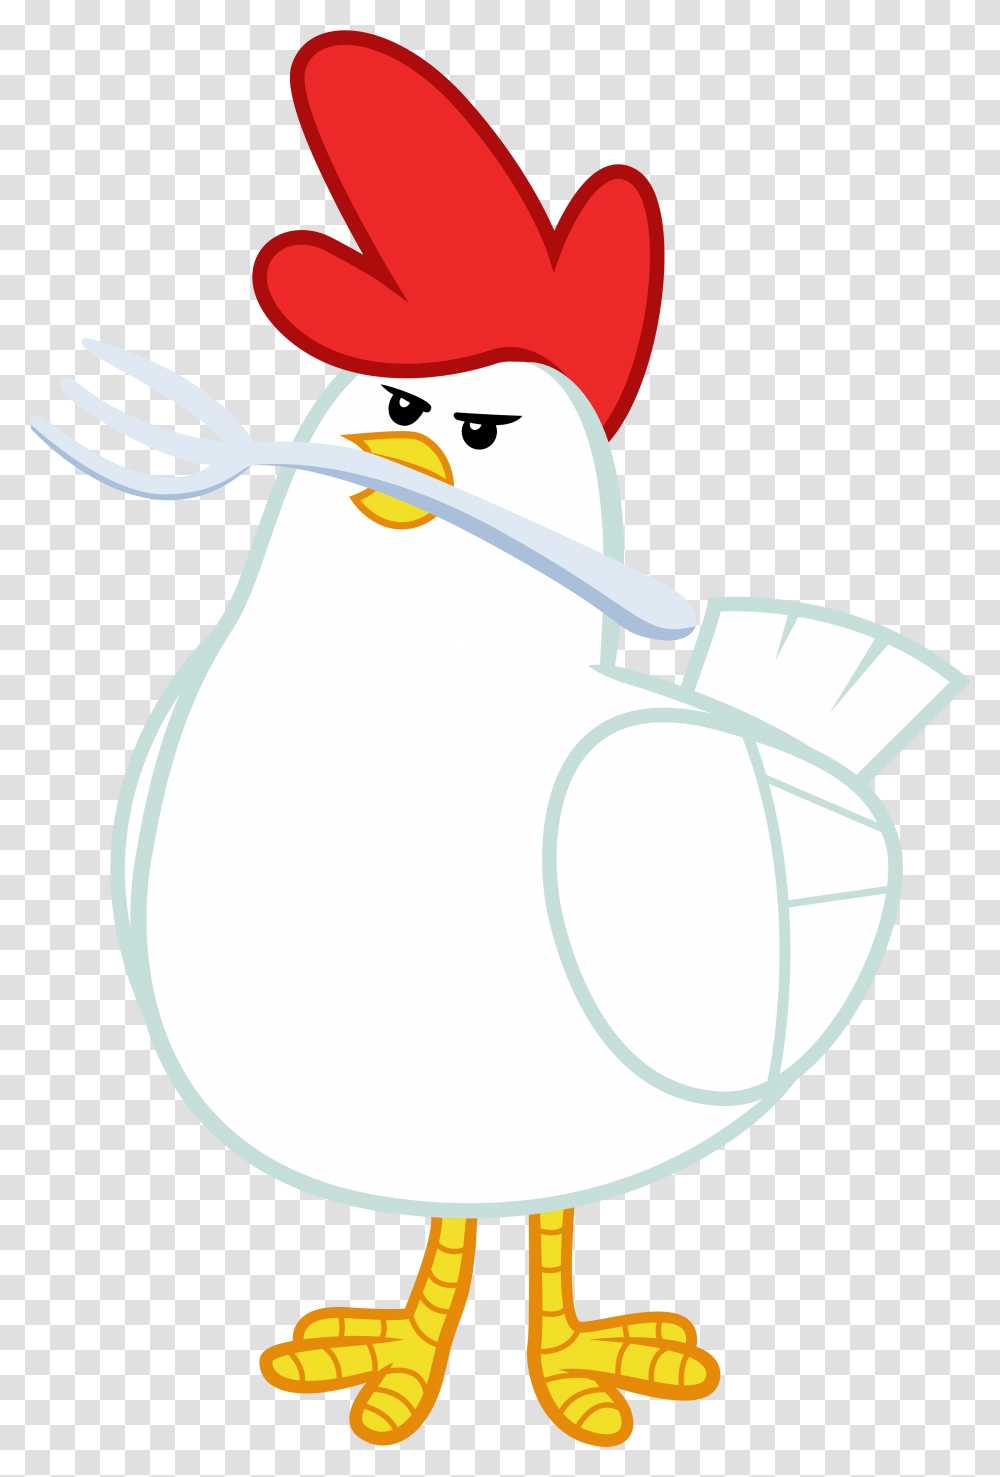 One Mad Chicken By The Cartoon, Lamp, Pottery, Label, Text Transparent Png